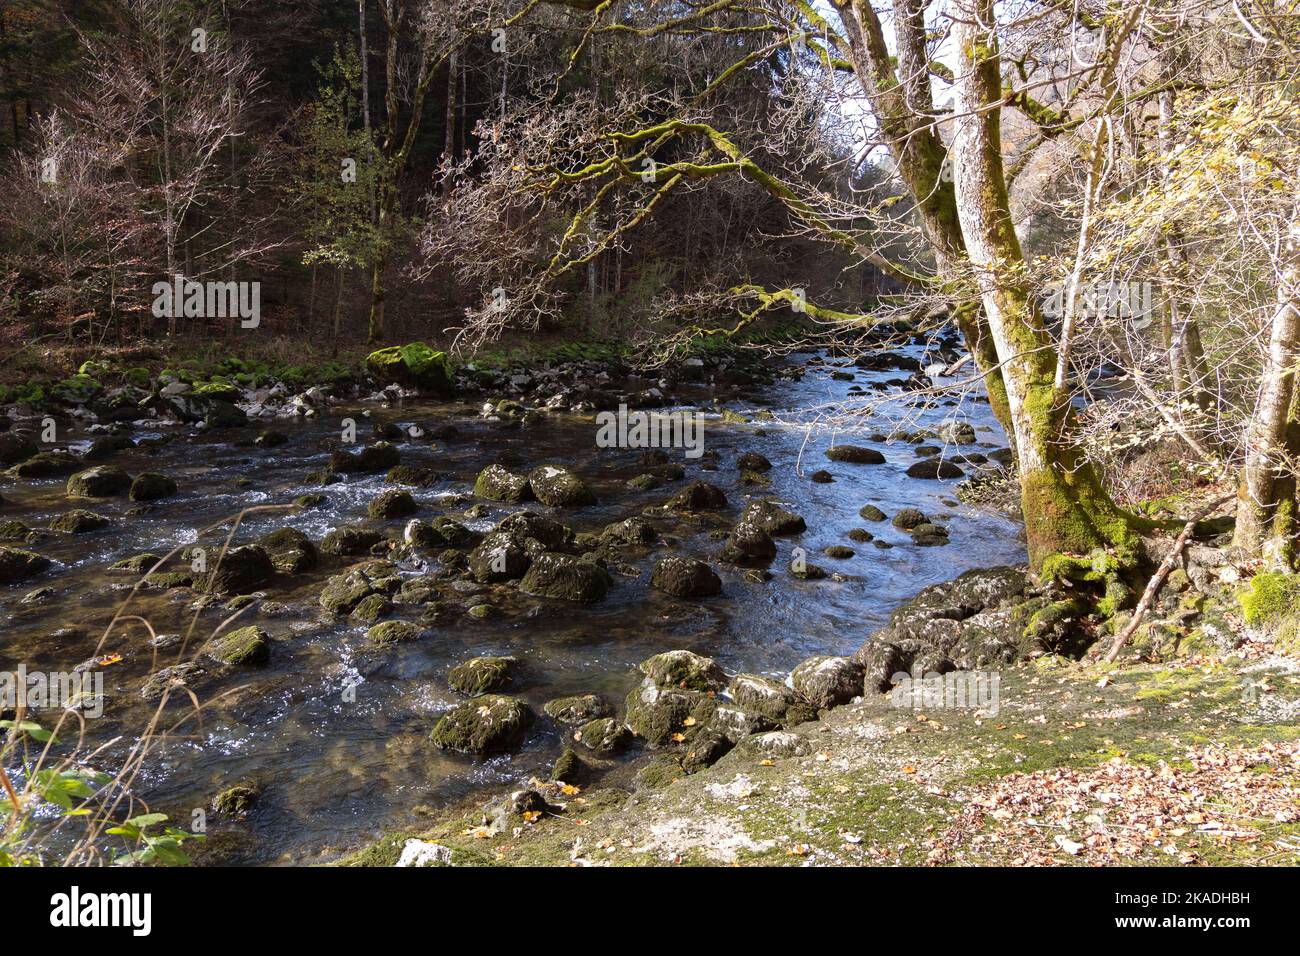 Gorges de l'Areuse, Noirague, Neuchatel, Switzerland, Europe. Beautiful romantic autumn landscape by the stream. River with mossy boulders, autumnal n Stock Photo